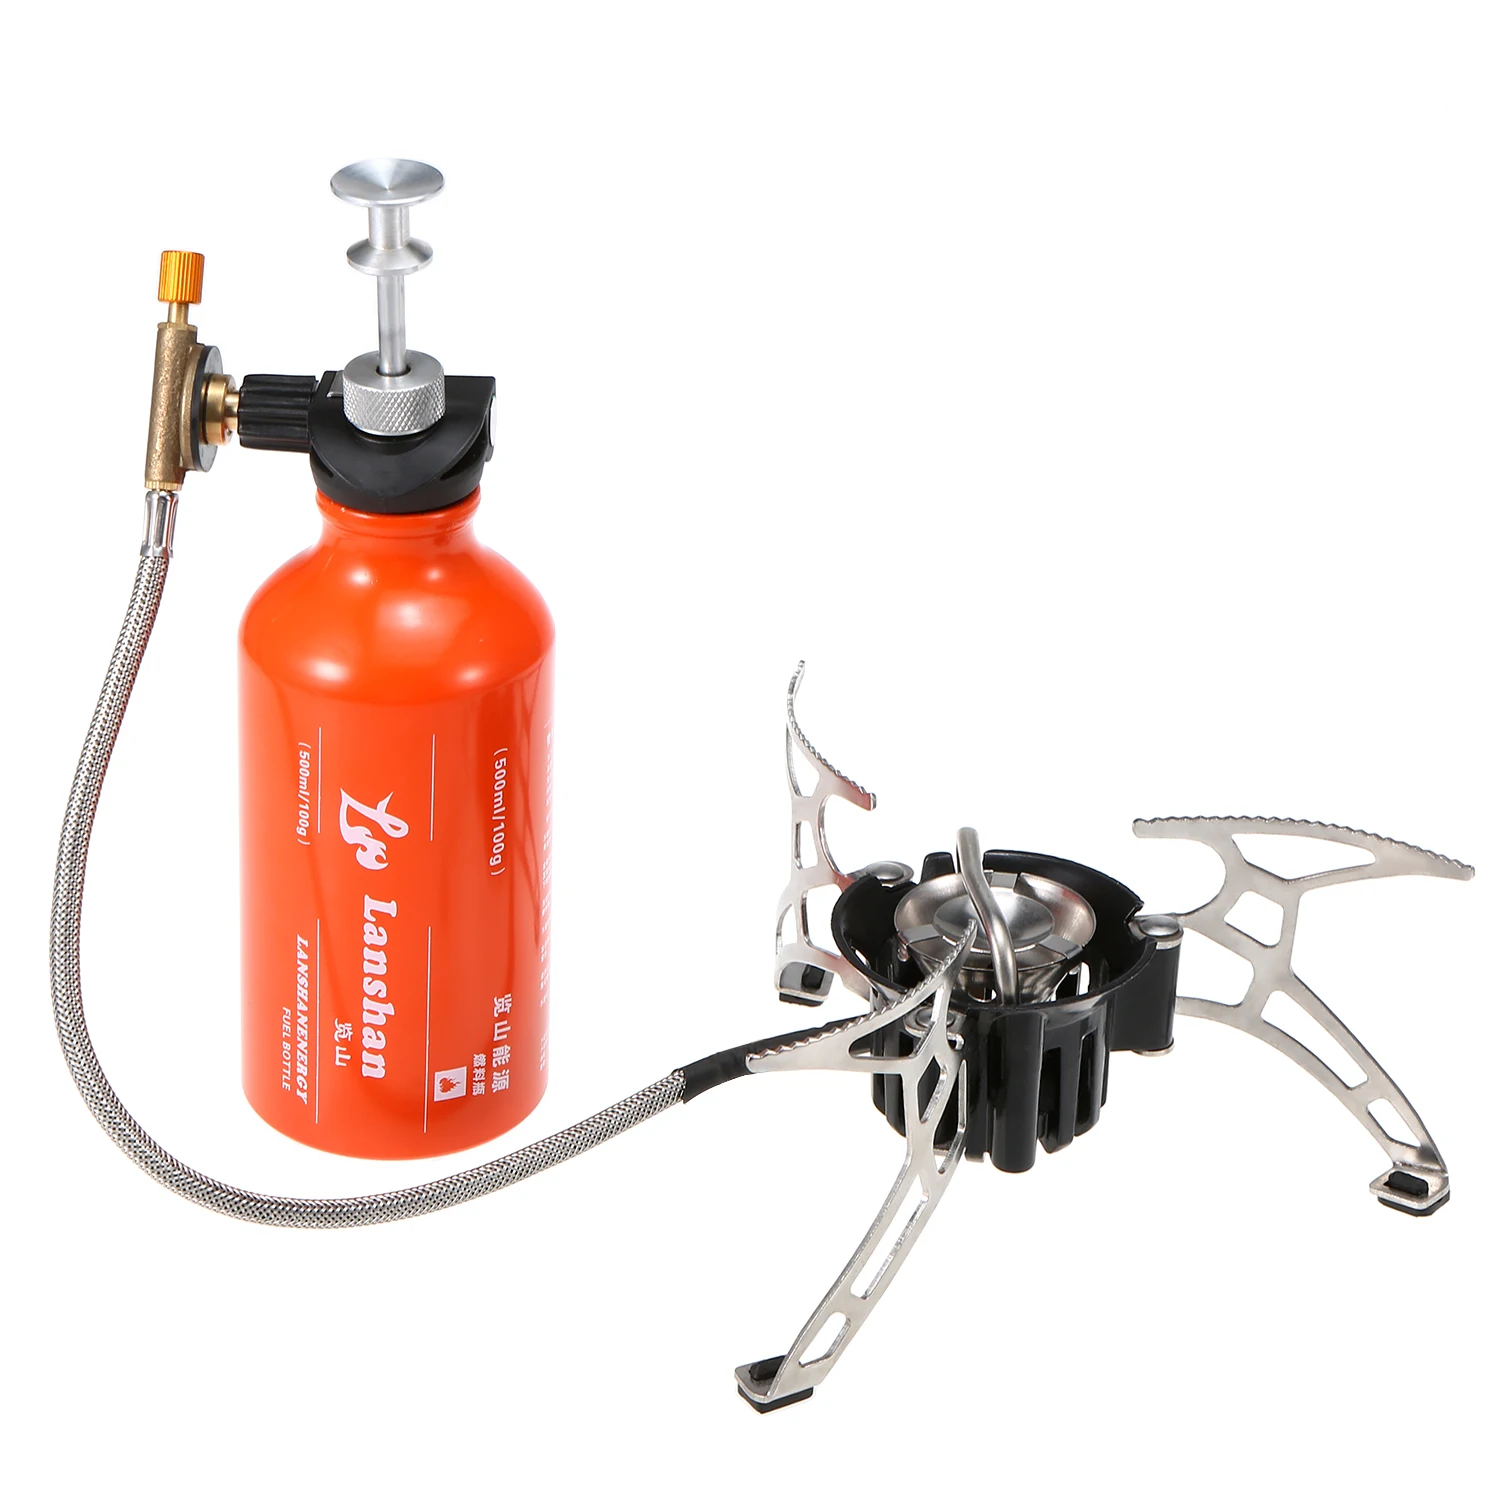 Excellent Quality Outdoor Camping Multi Fuel Oil Stove With 500ml Gasoline Fuel Bottle For Diesel Alcohol New In Fast Delivery